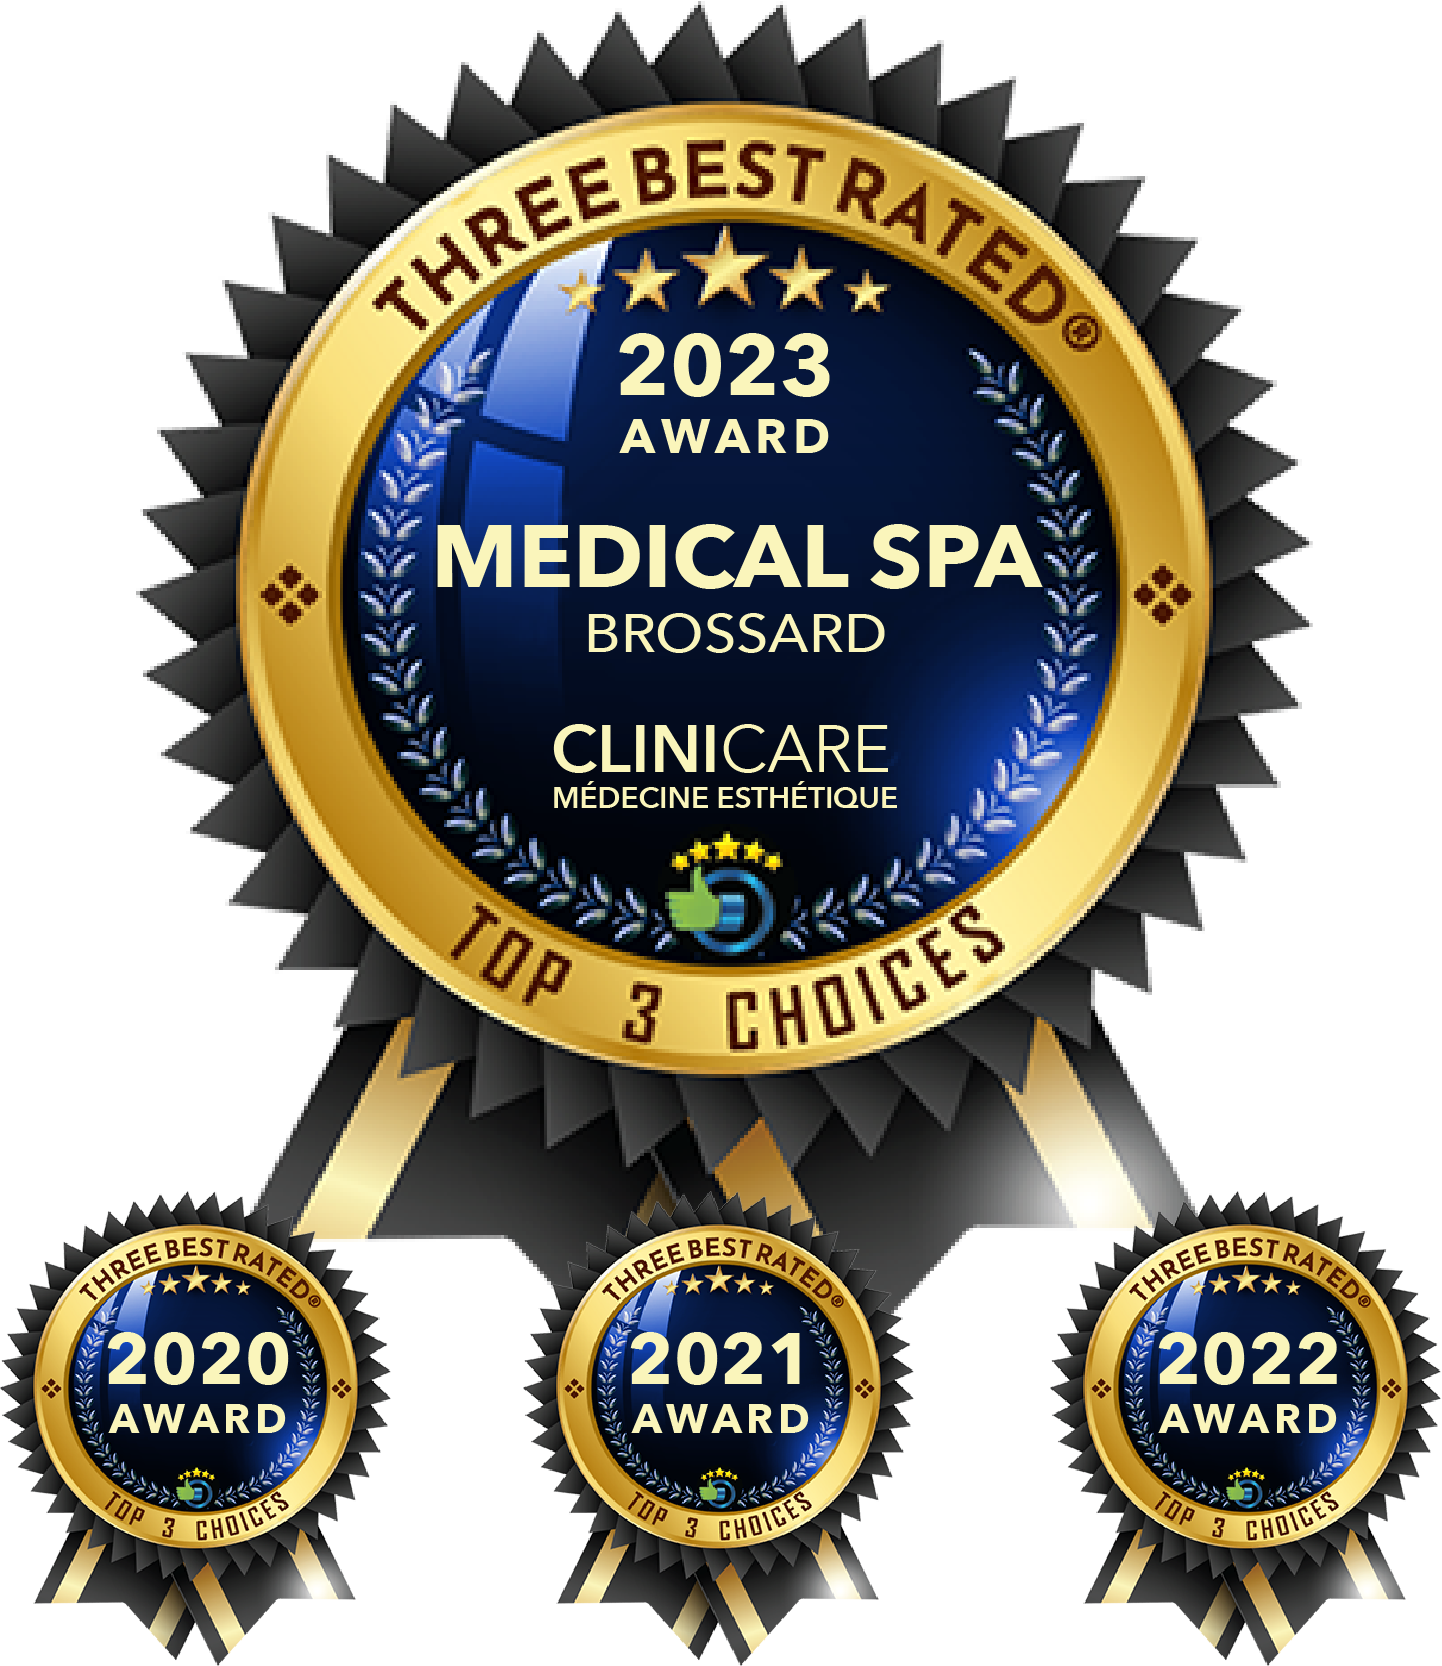 CLINICARE - Three Best Rated 2023